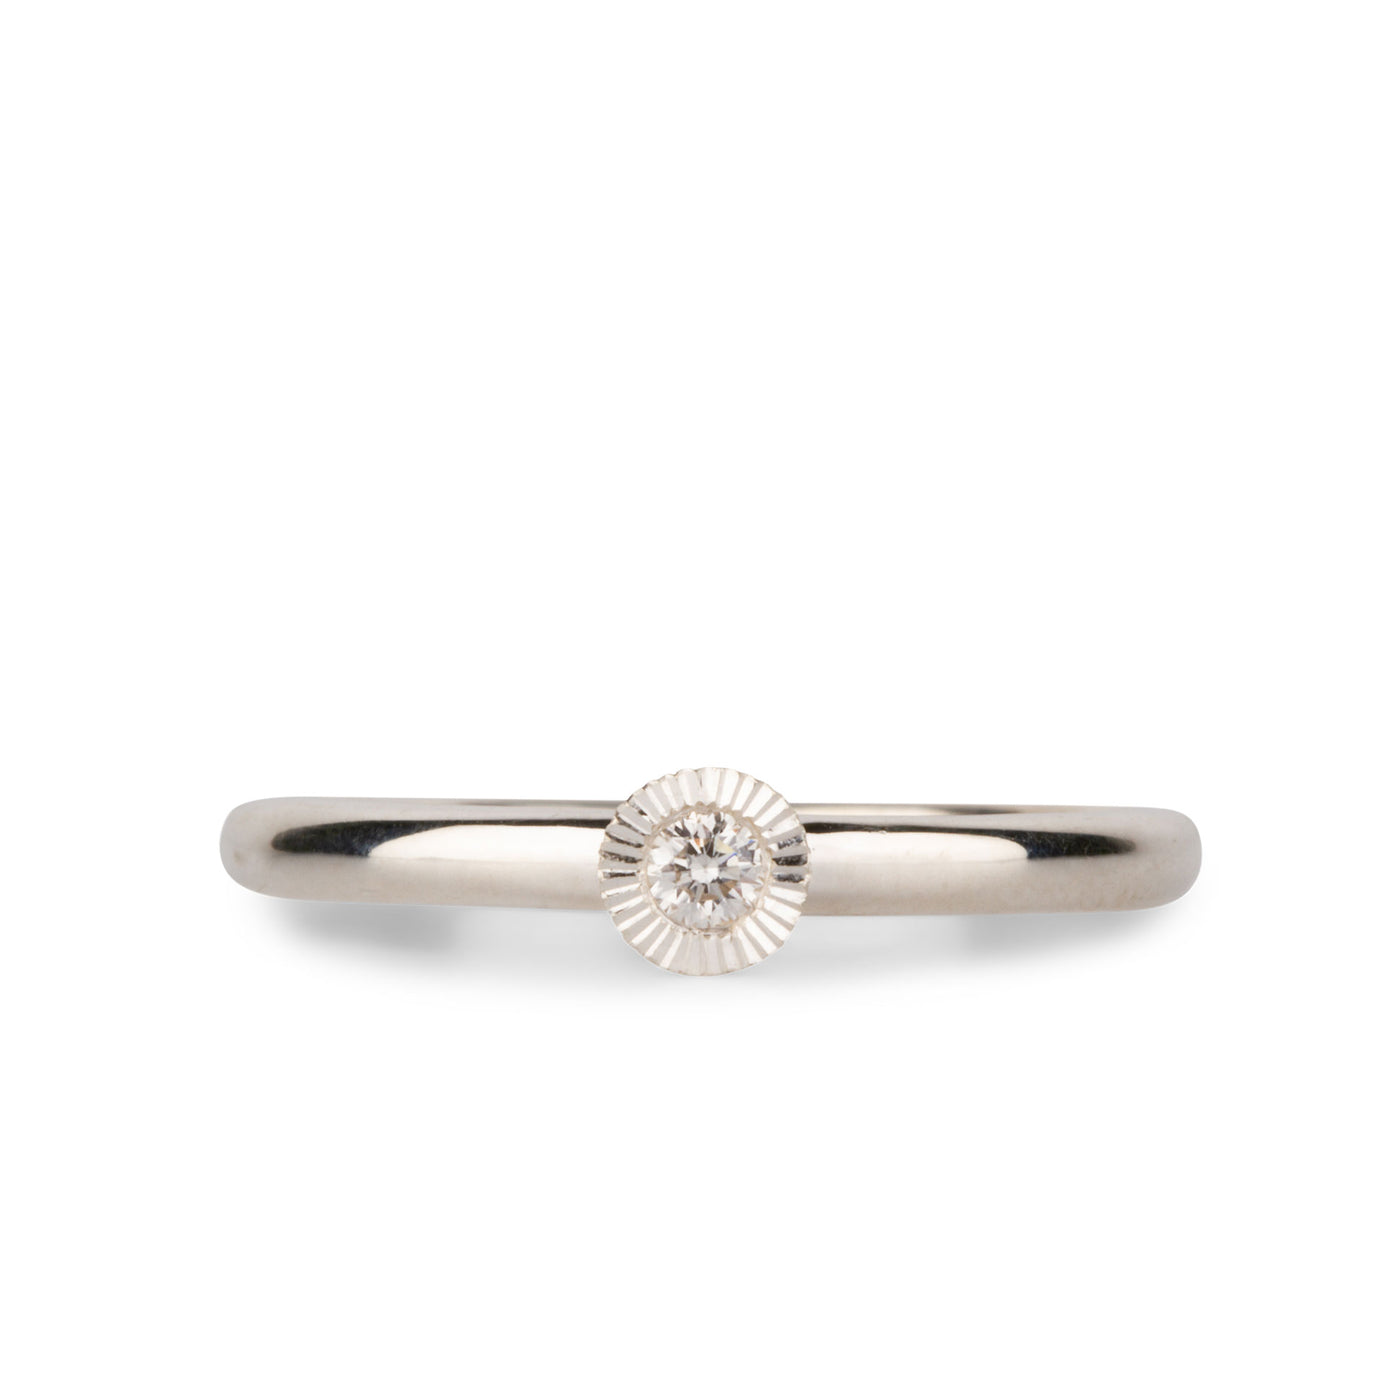 sterling silver medium aurora stacking ring with a 2.5mm center diamond and engraved border